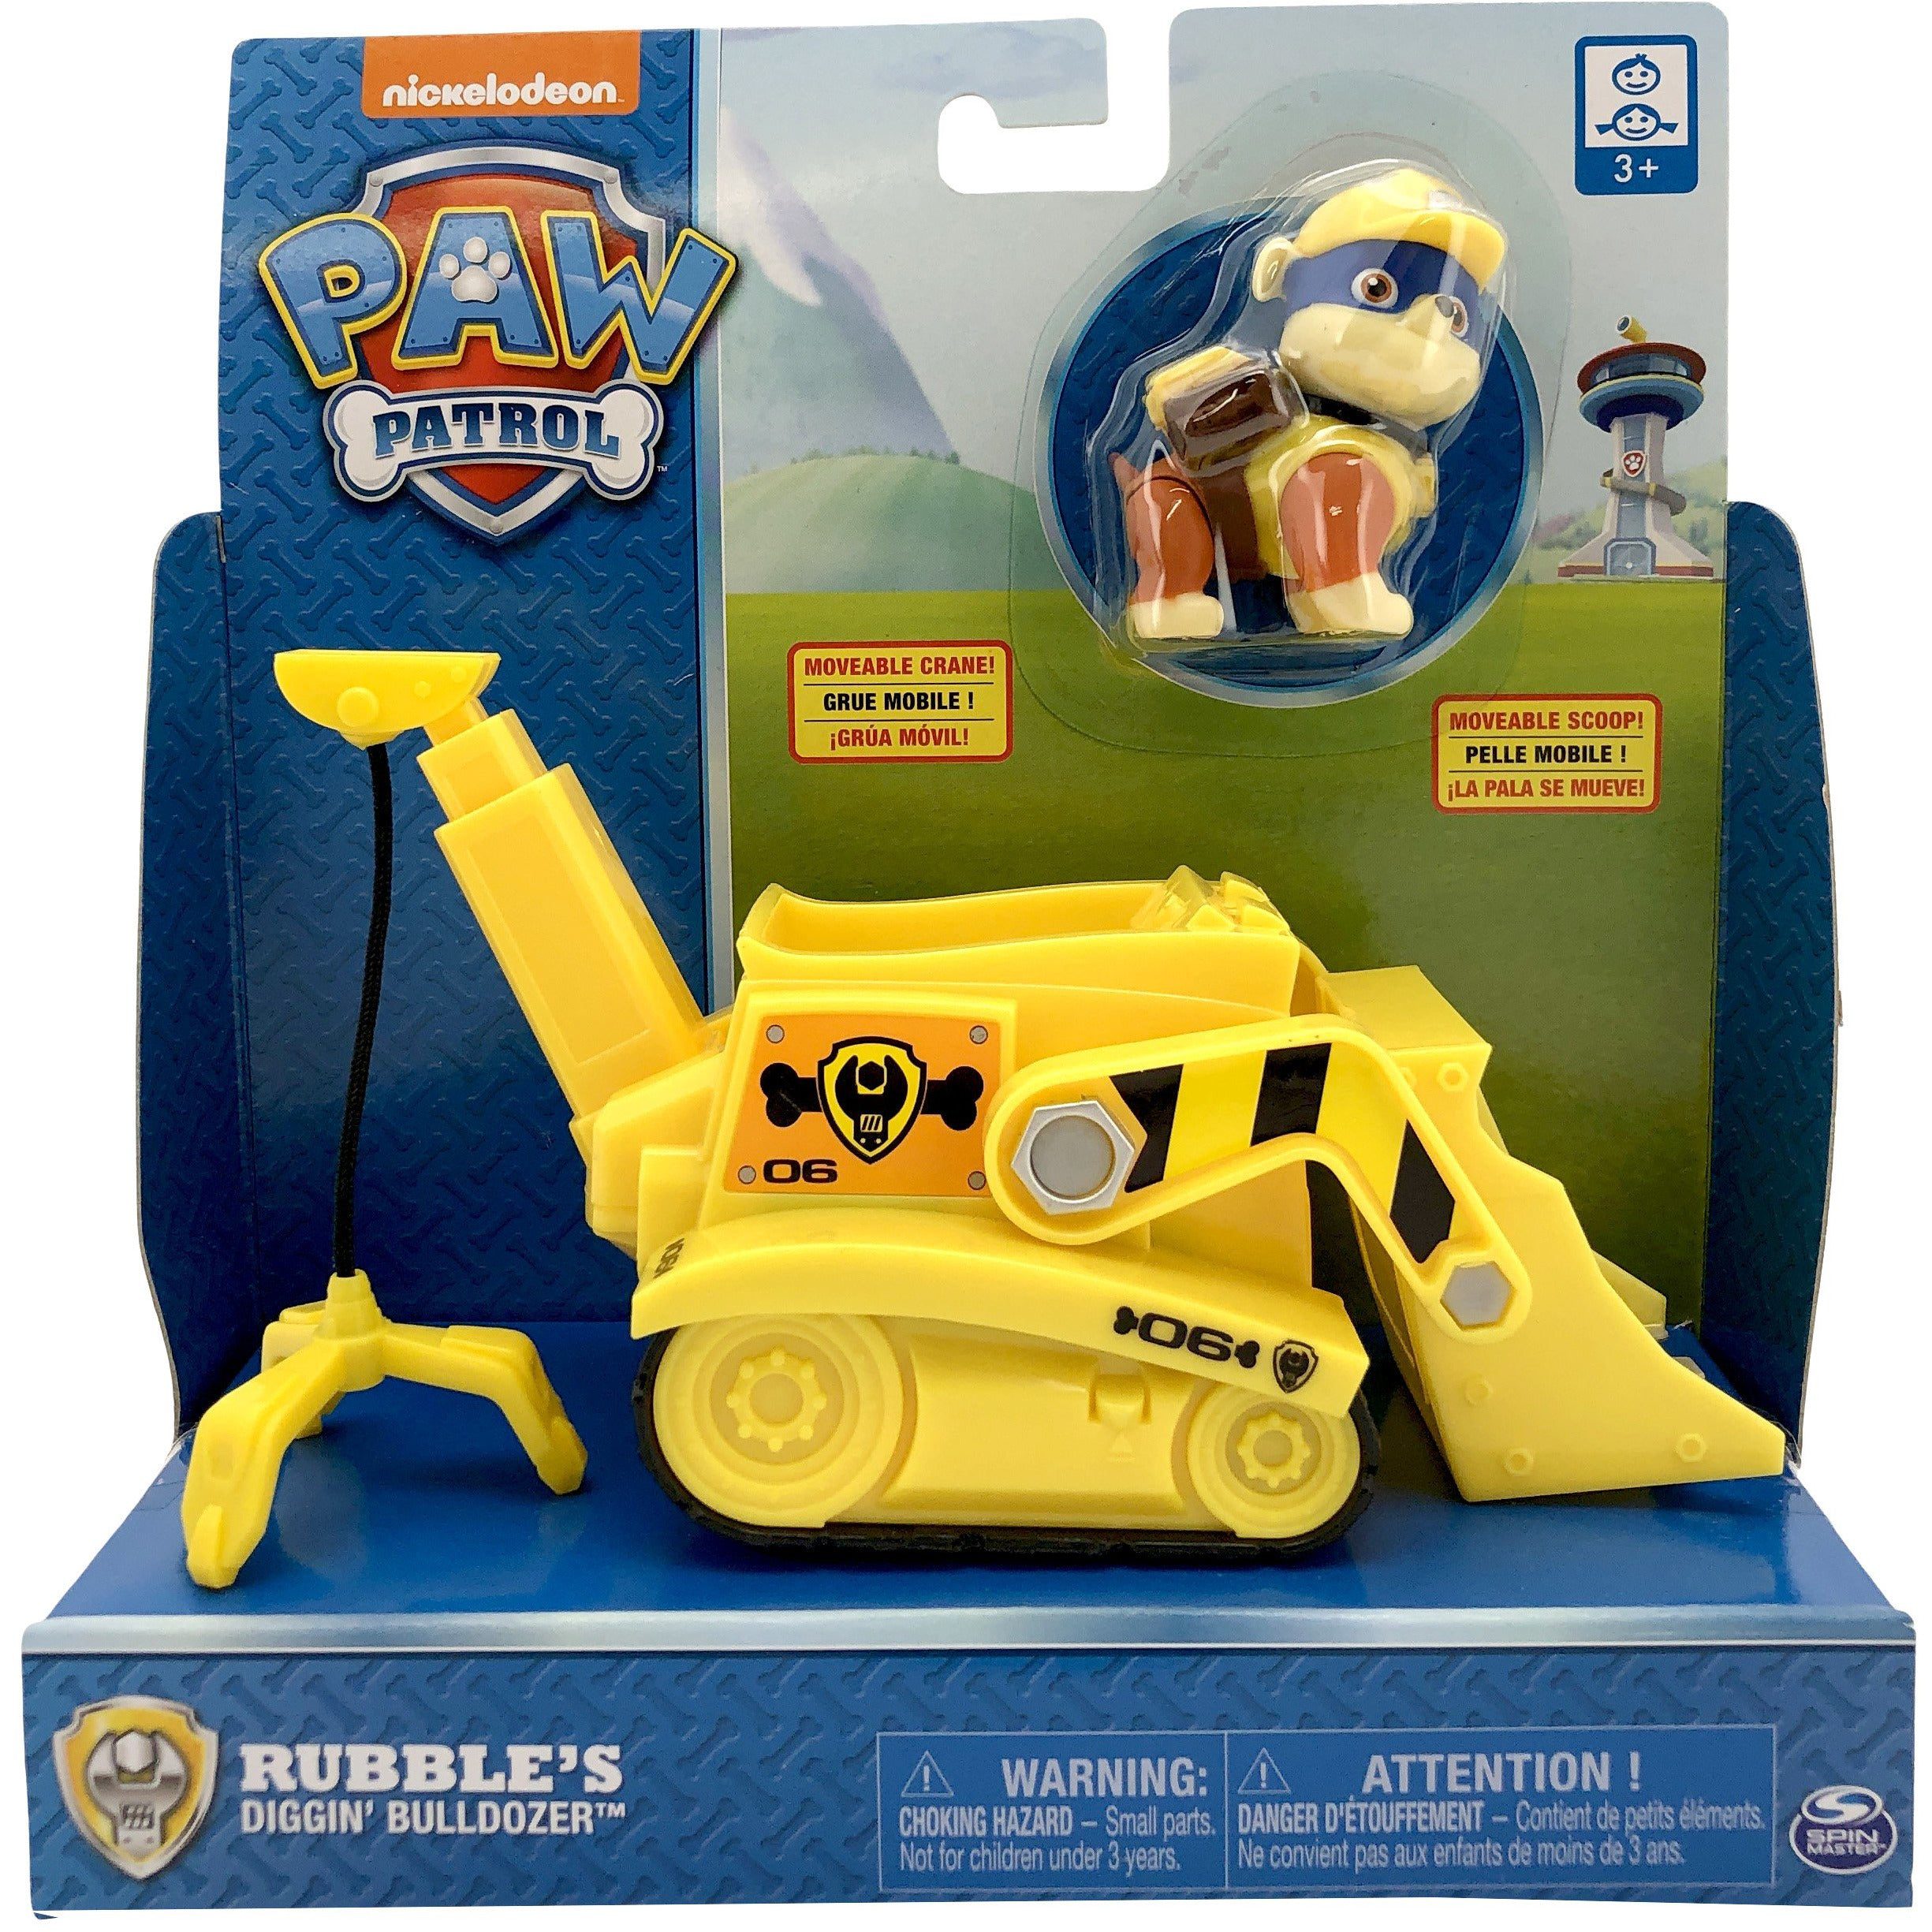 https://www.canadawideliquidations.com/wp-content/uploads/2019/11/products-Rubble_with_Diggin_Bulldozer.jpg